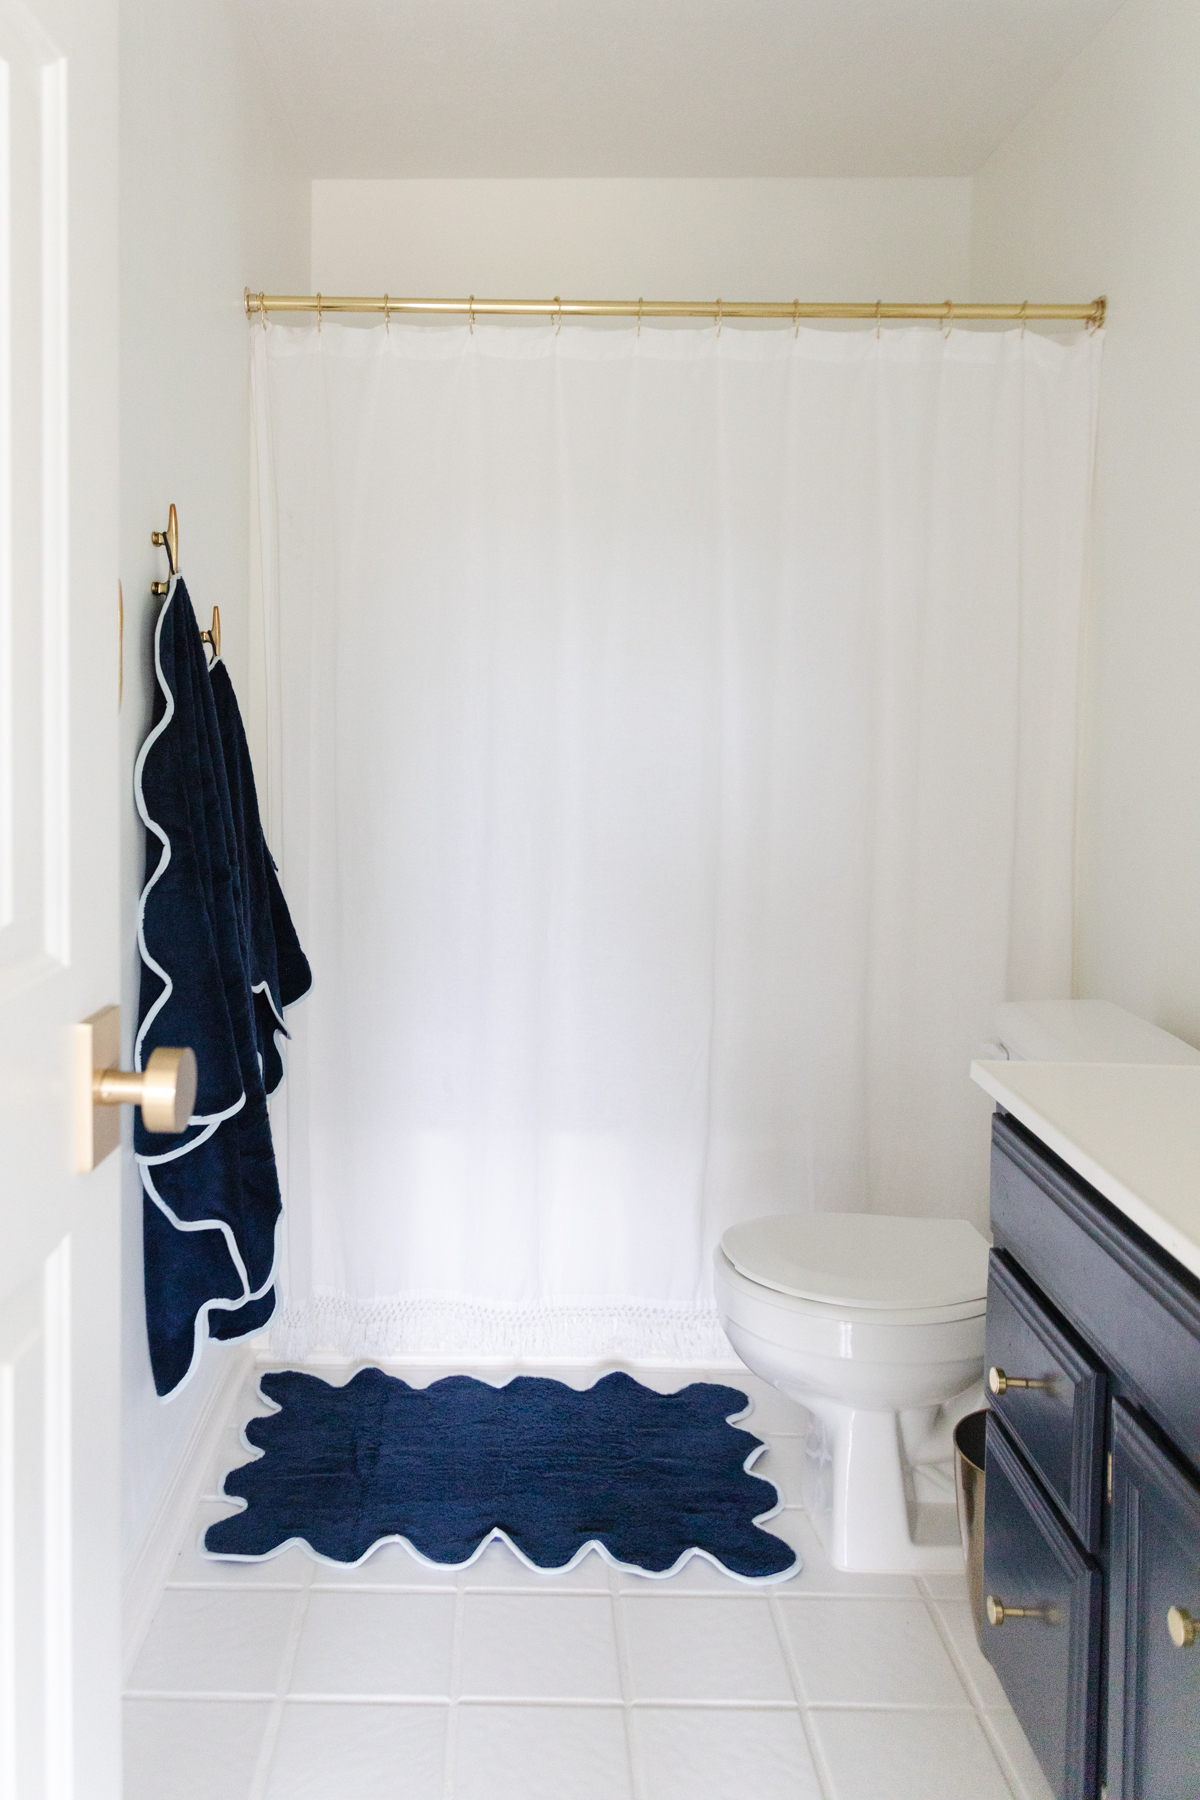 A nautical bathroom with a blue rug and white shower curtain.